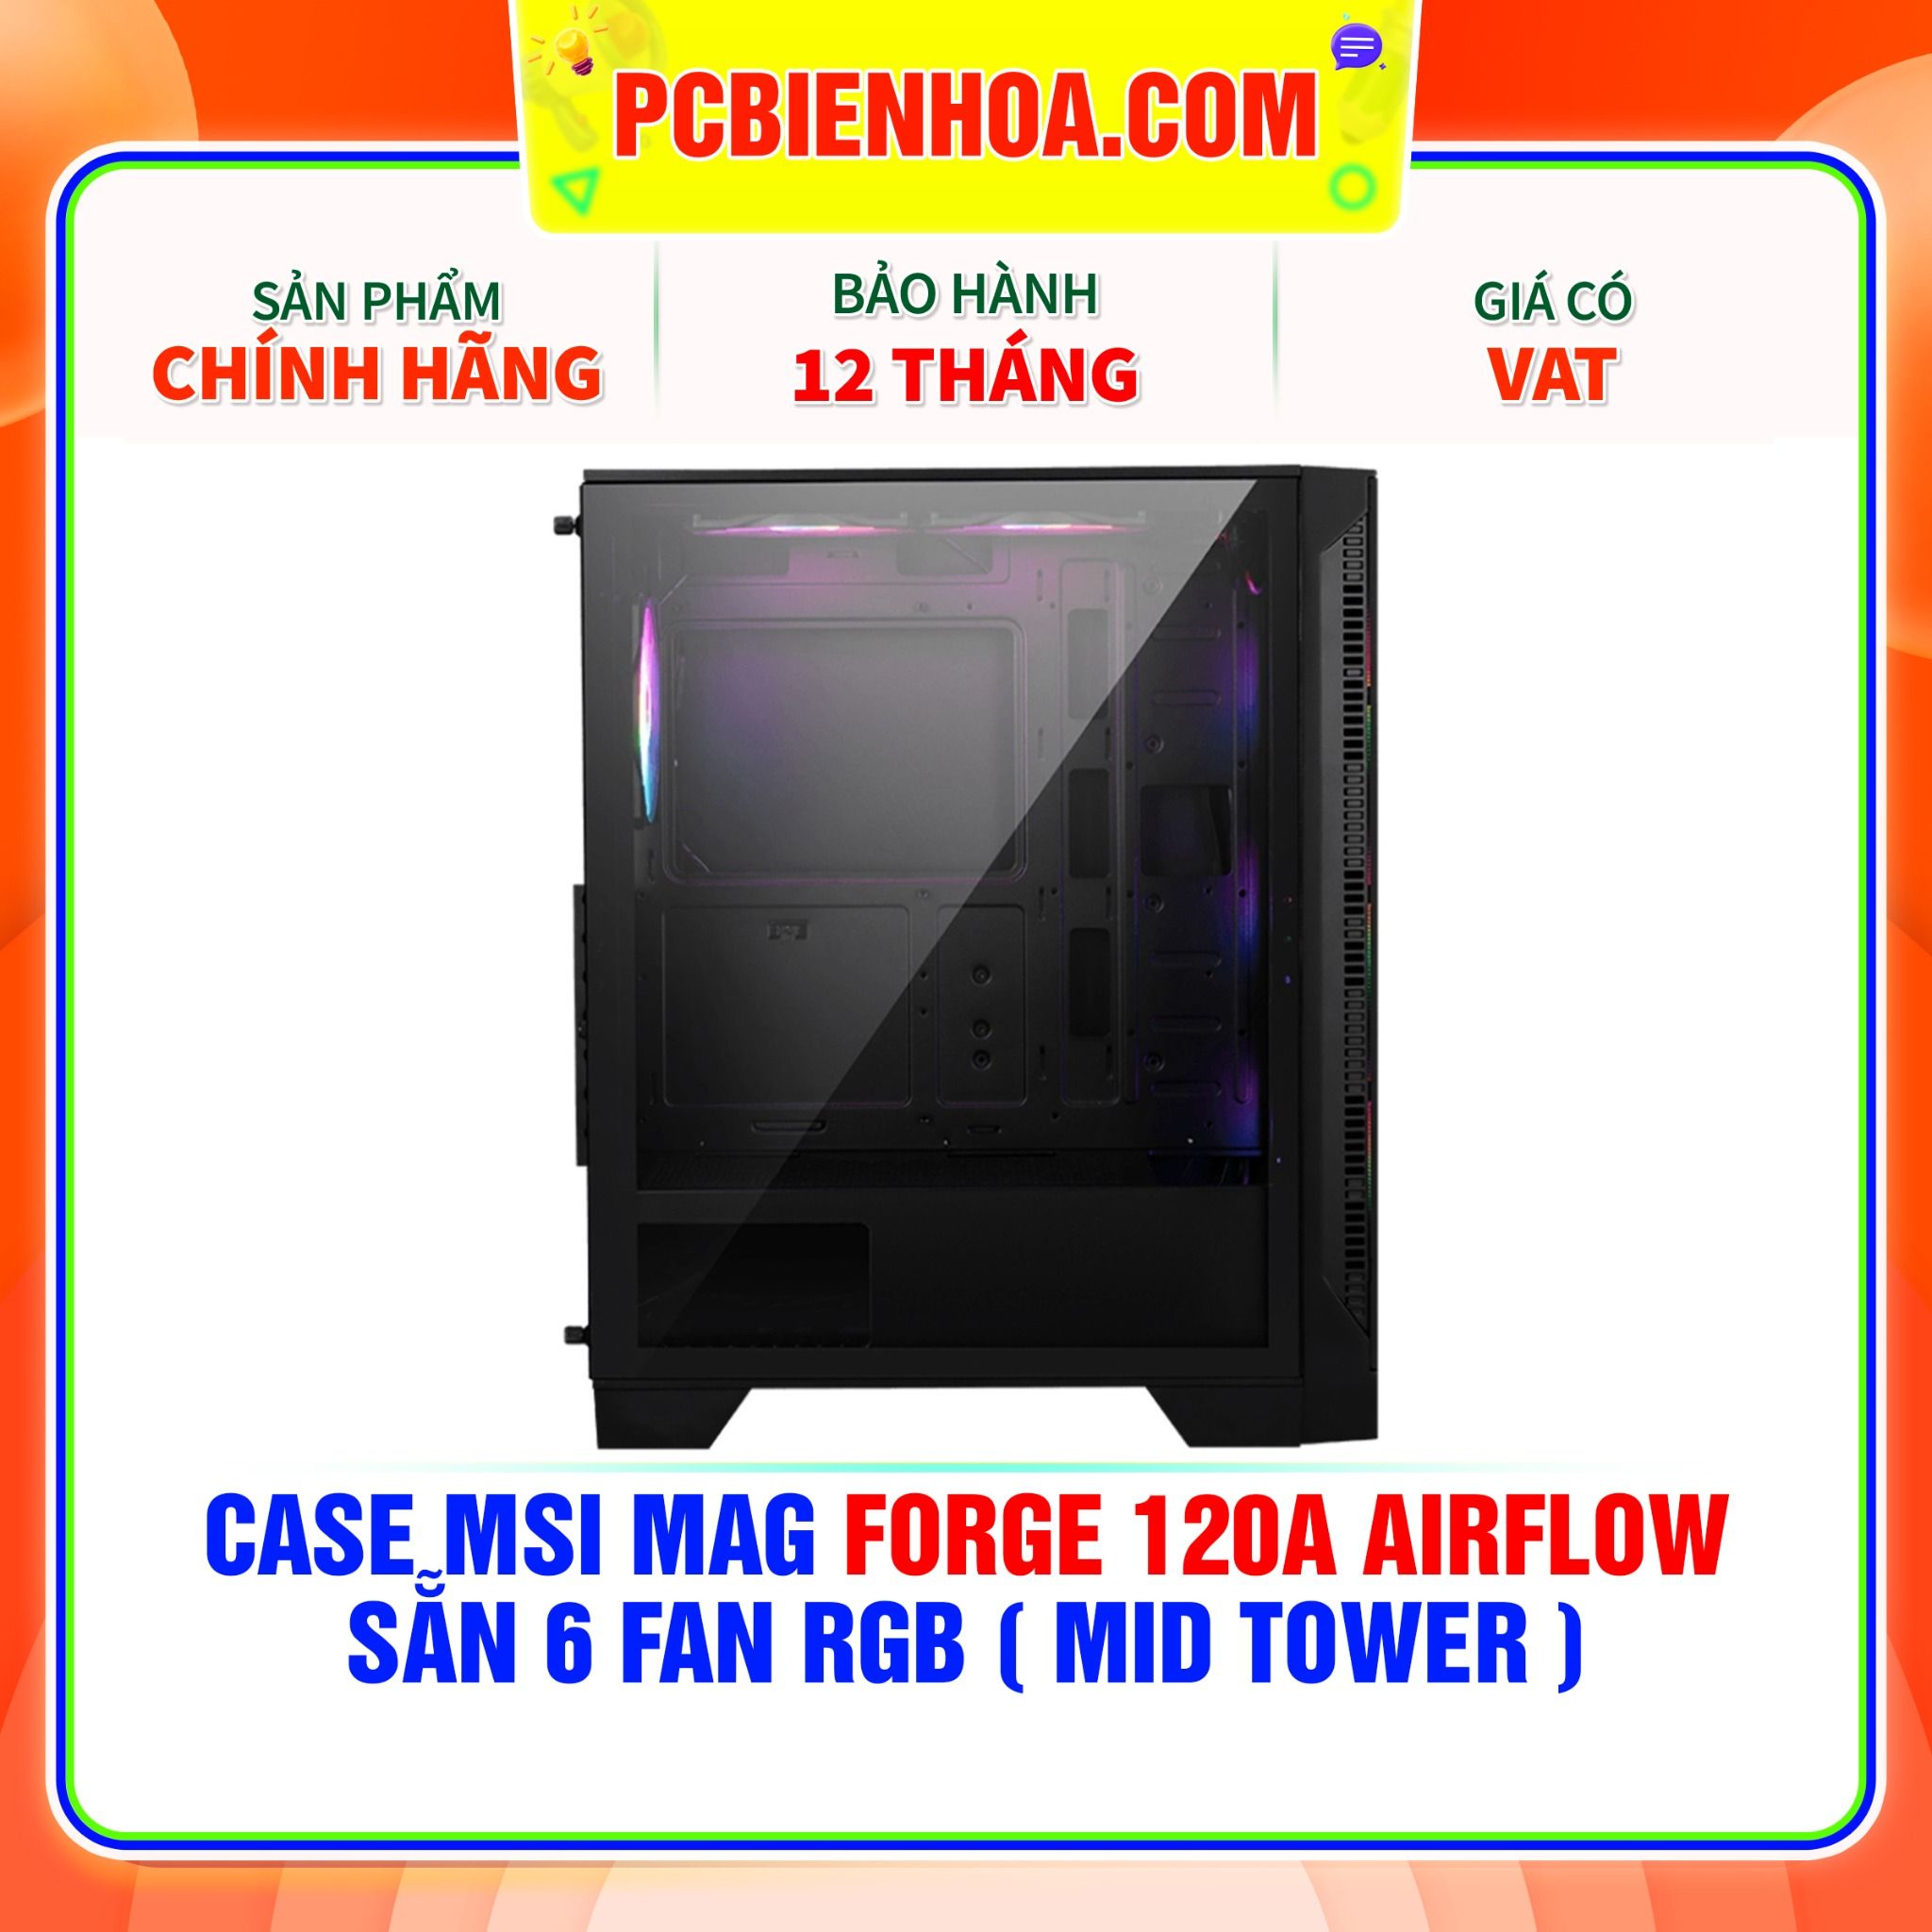  CASE MSI MAG FORGE 120A AIRFLOW - SẴN 6 FAN RGB ( MID TOWER ) 